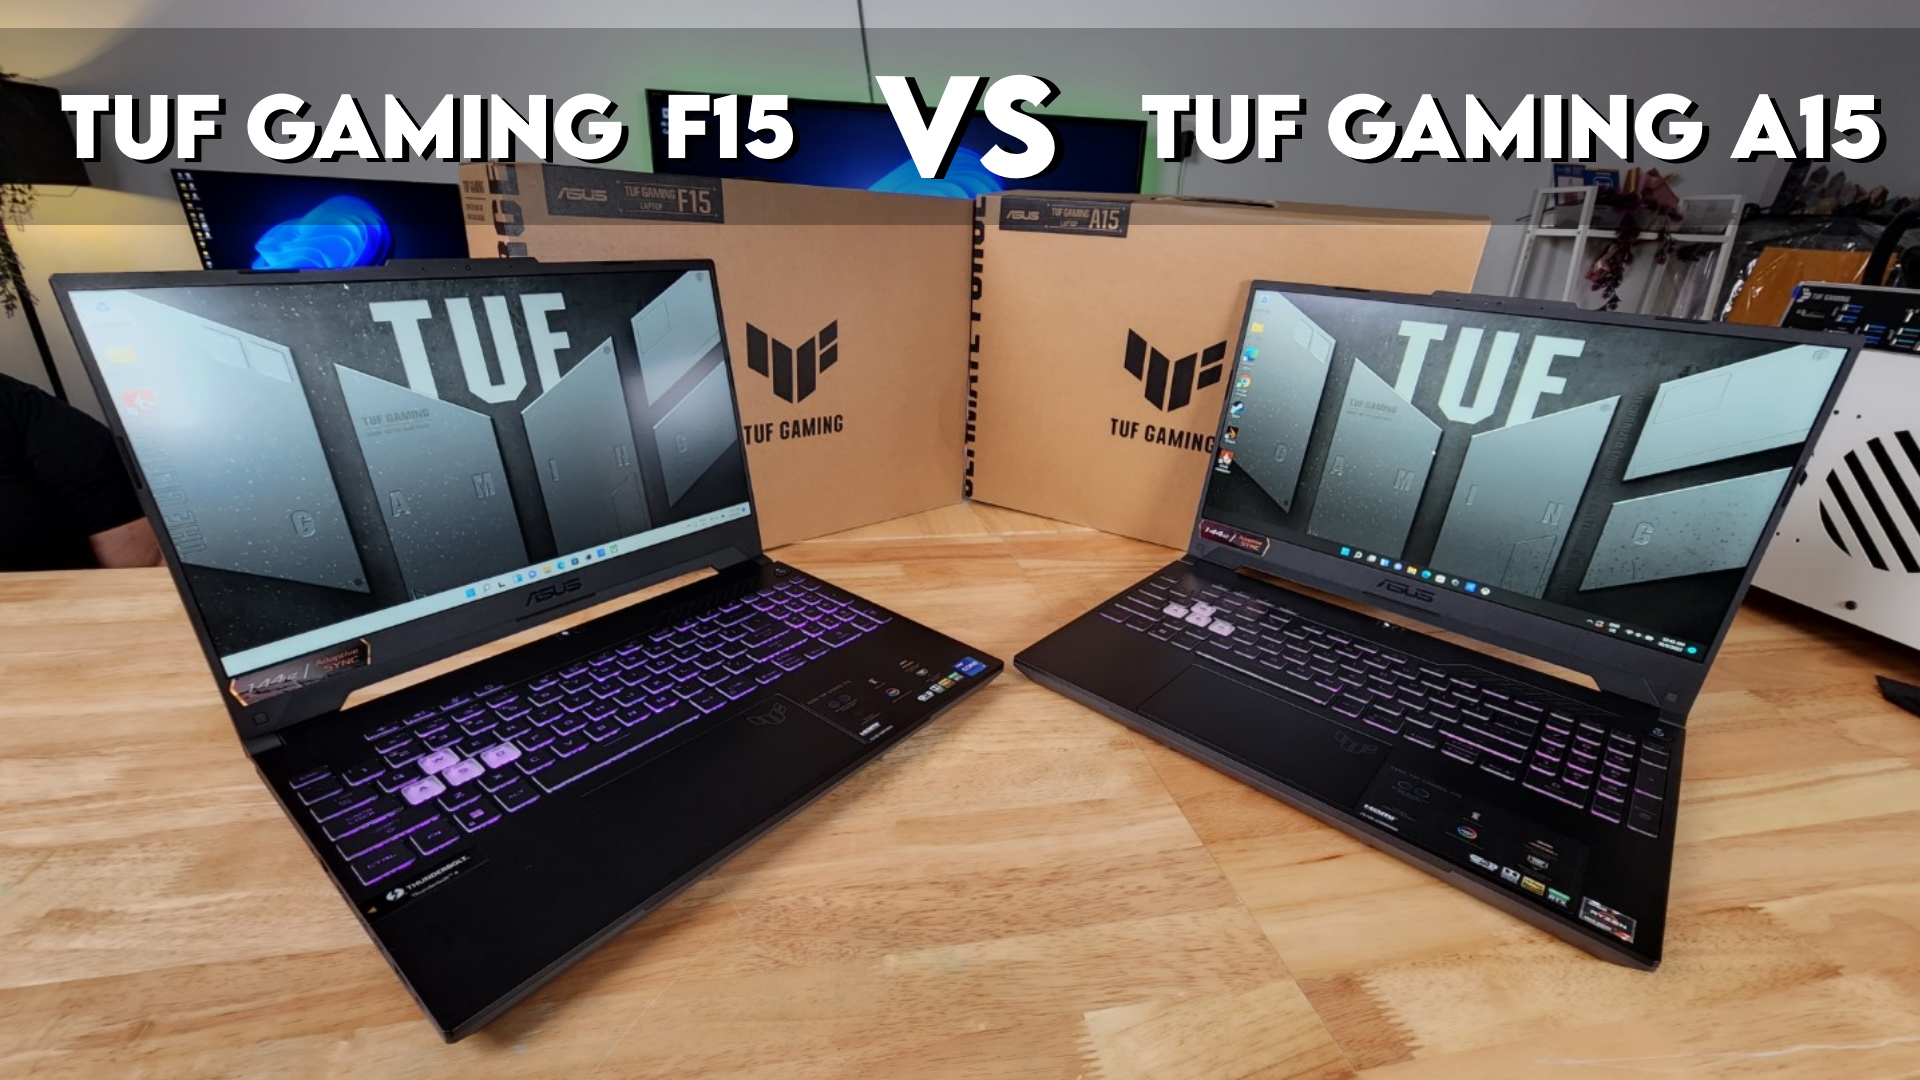 ASUS TUF GAMING F15 VS TUF GAMING A15 - Which One Should You Get? 